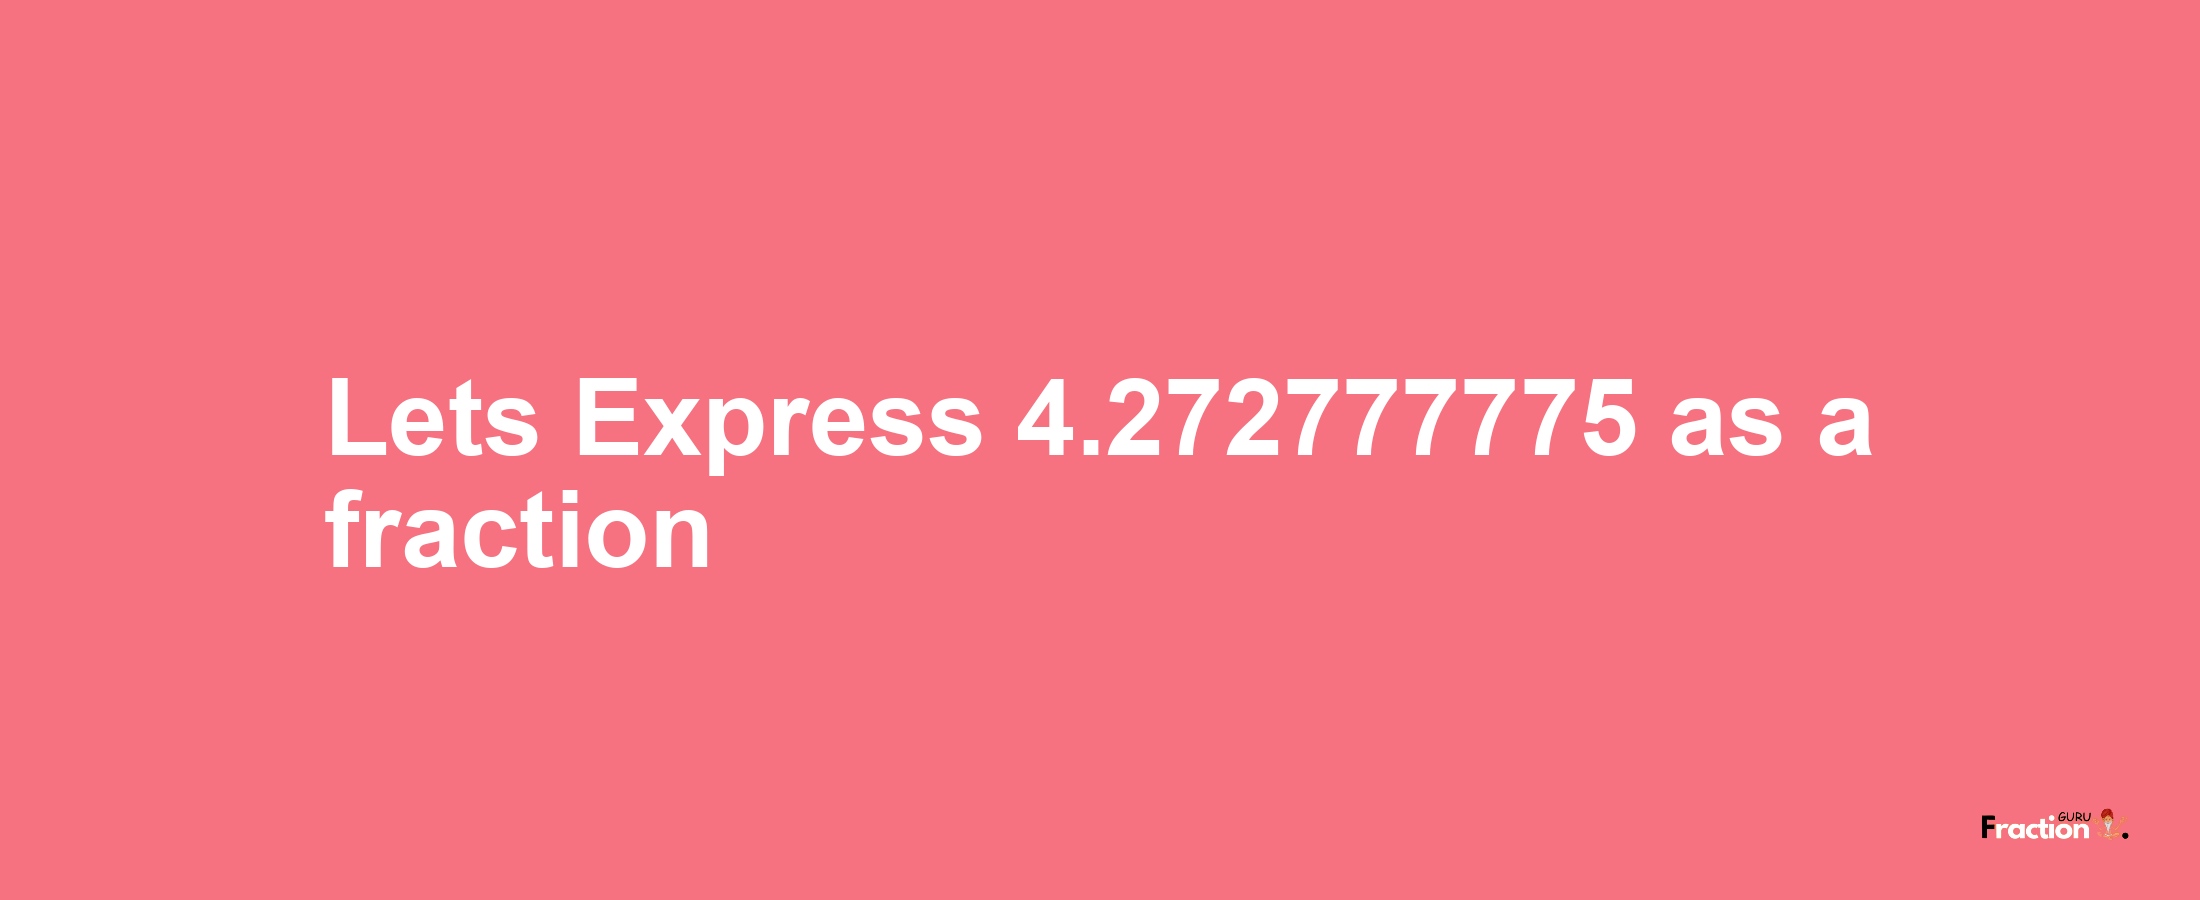 Lets Express 4.272777775 as afraction